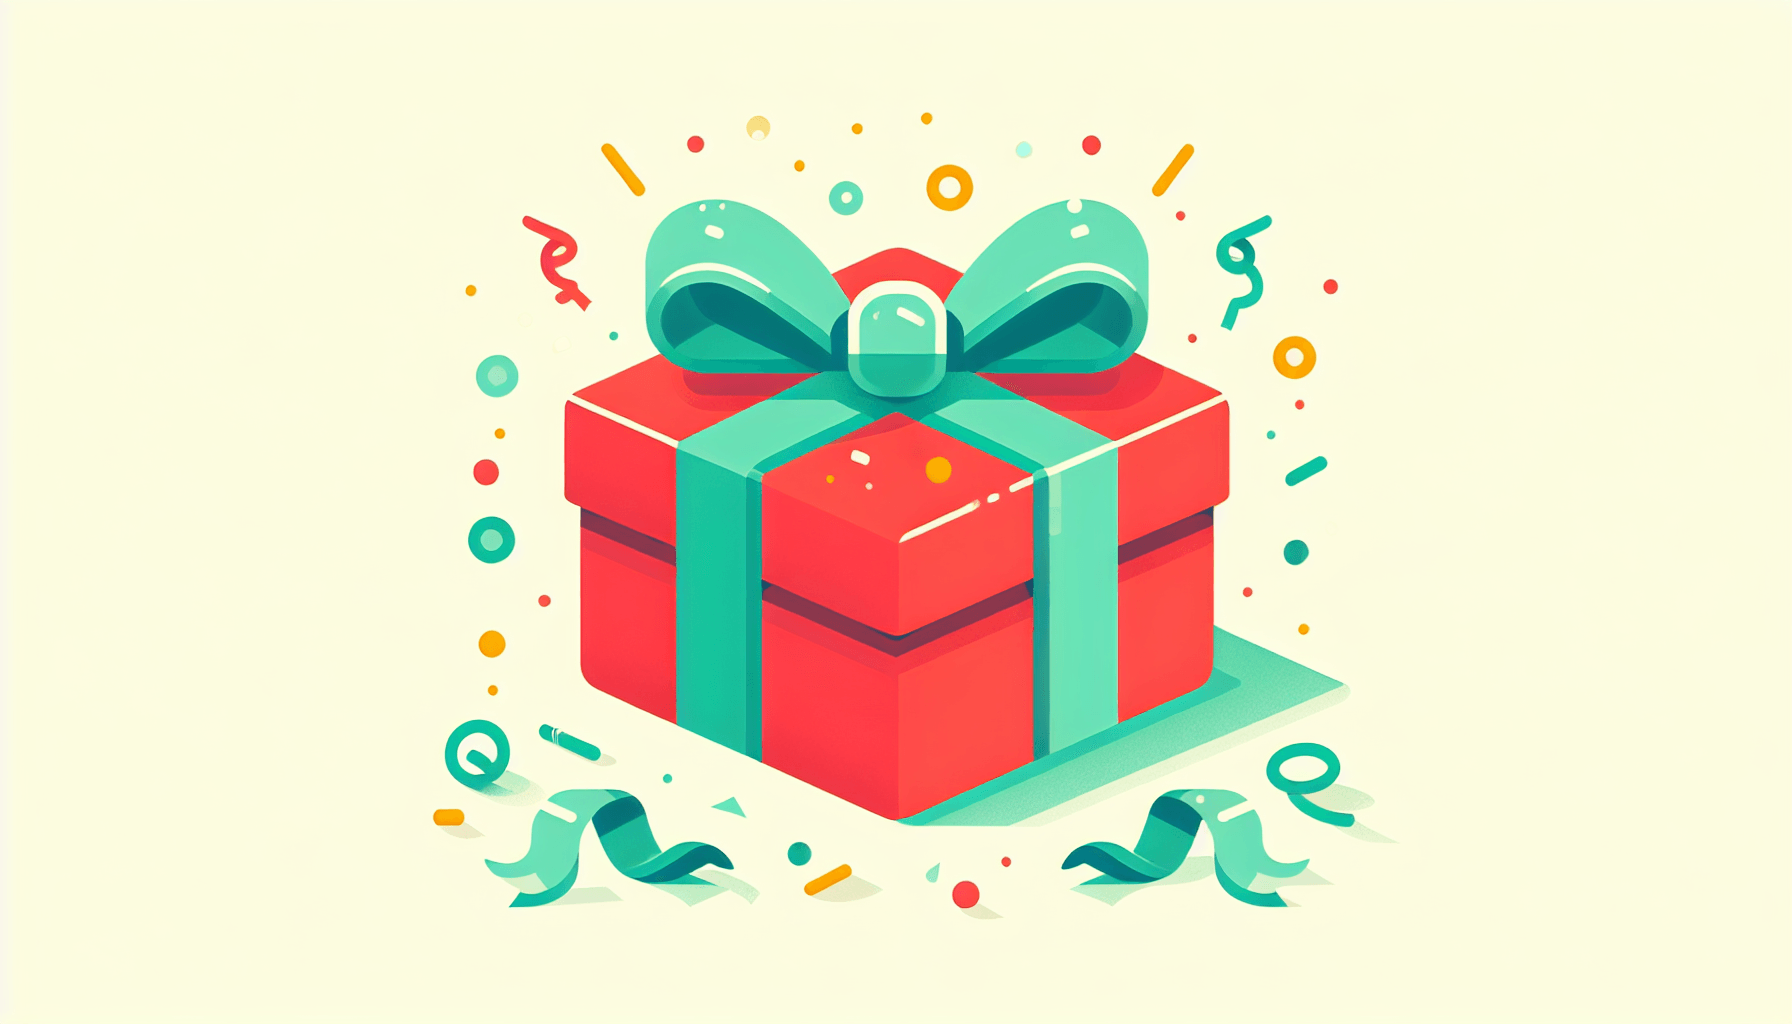 Gift in flat illustration style and white background, red #f47574, green #88c7a8, yellow #fcc44b, and blue #645bc8 colors.